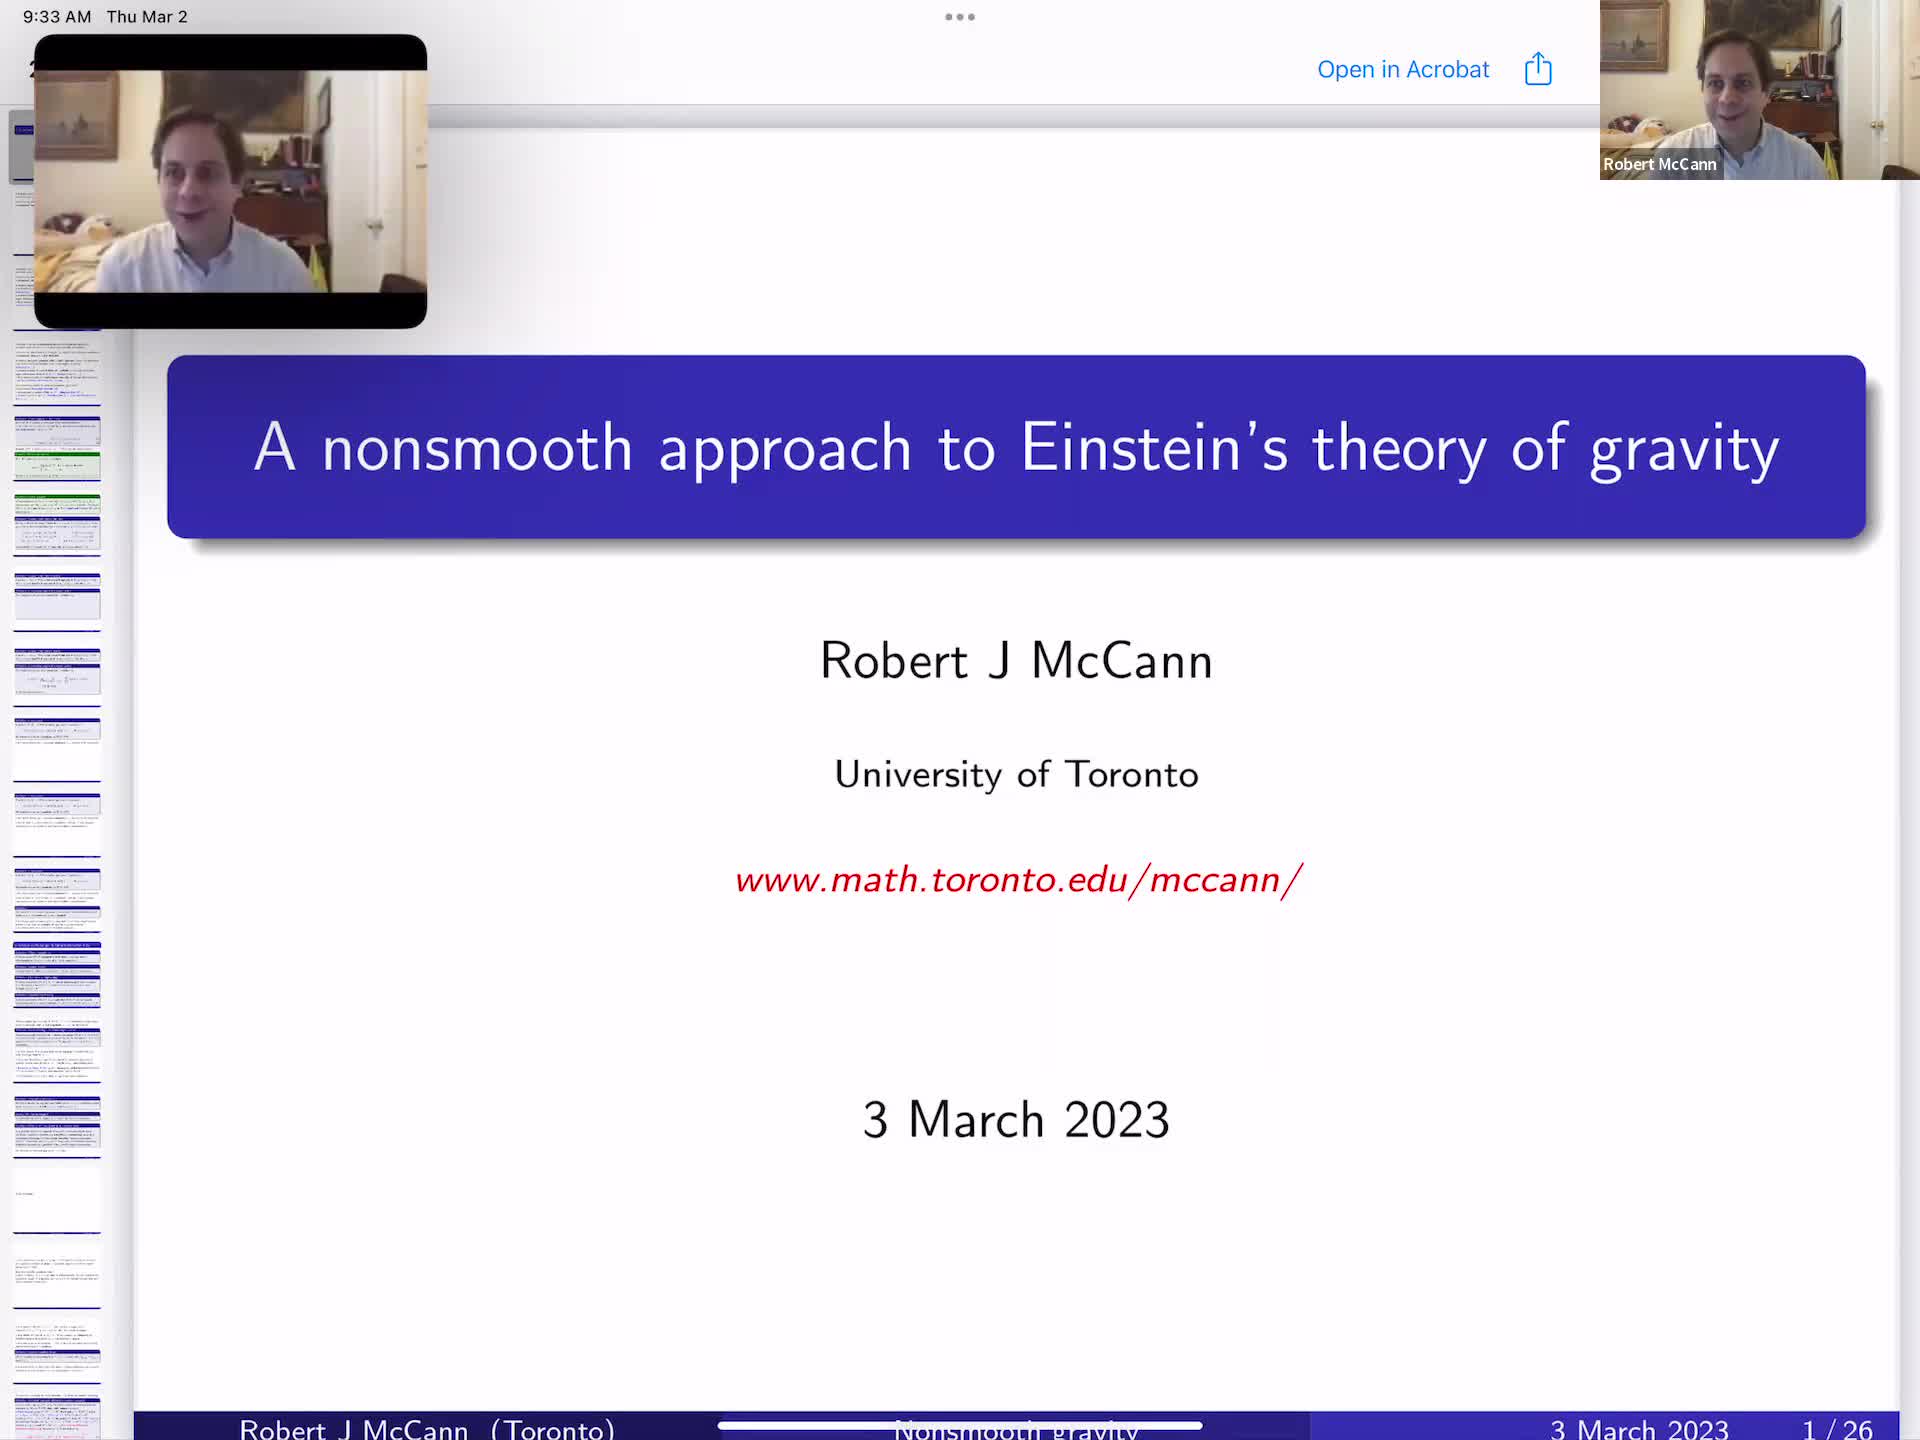  2023.03.02 A nonsmooth approach to Einstein’s theory of gravity